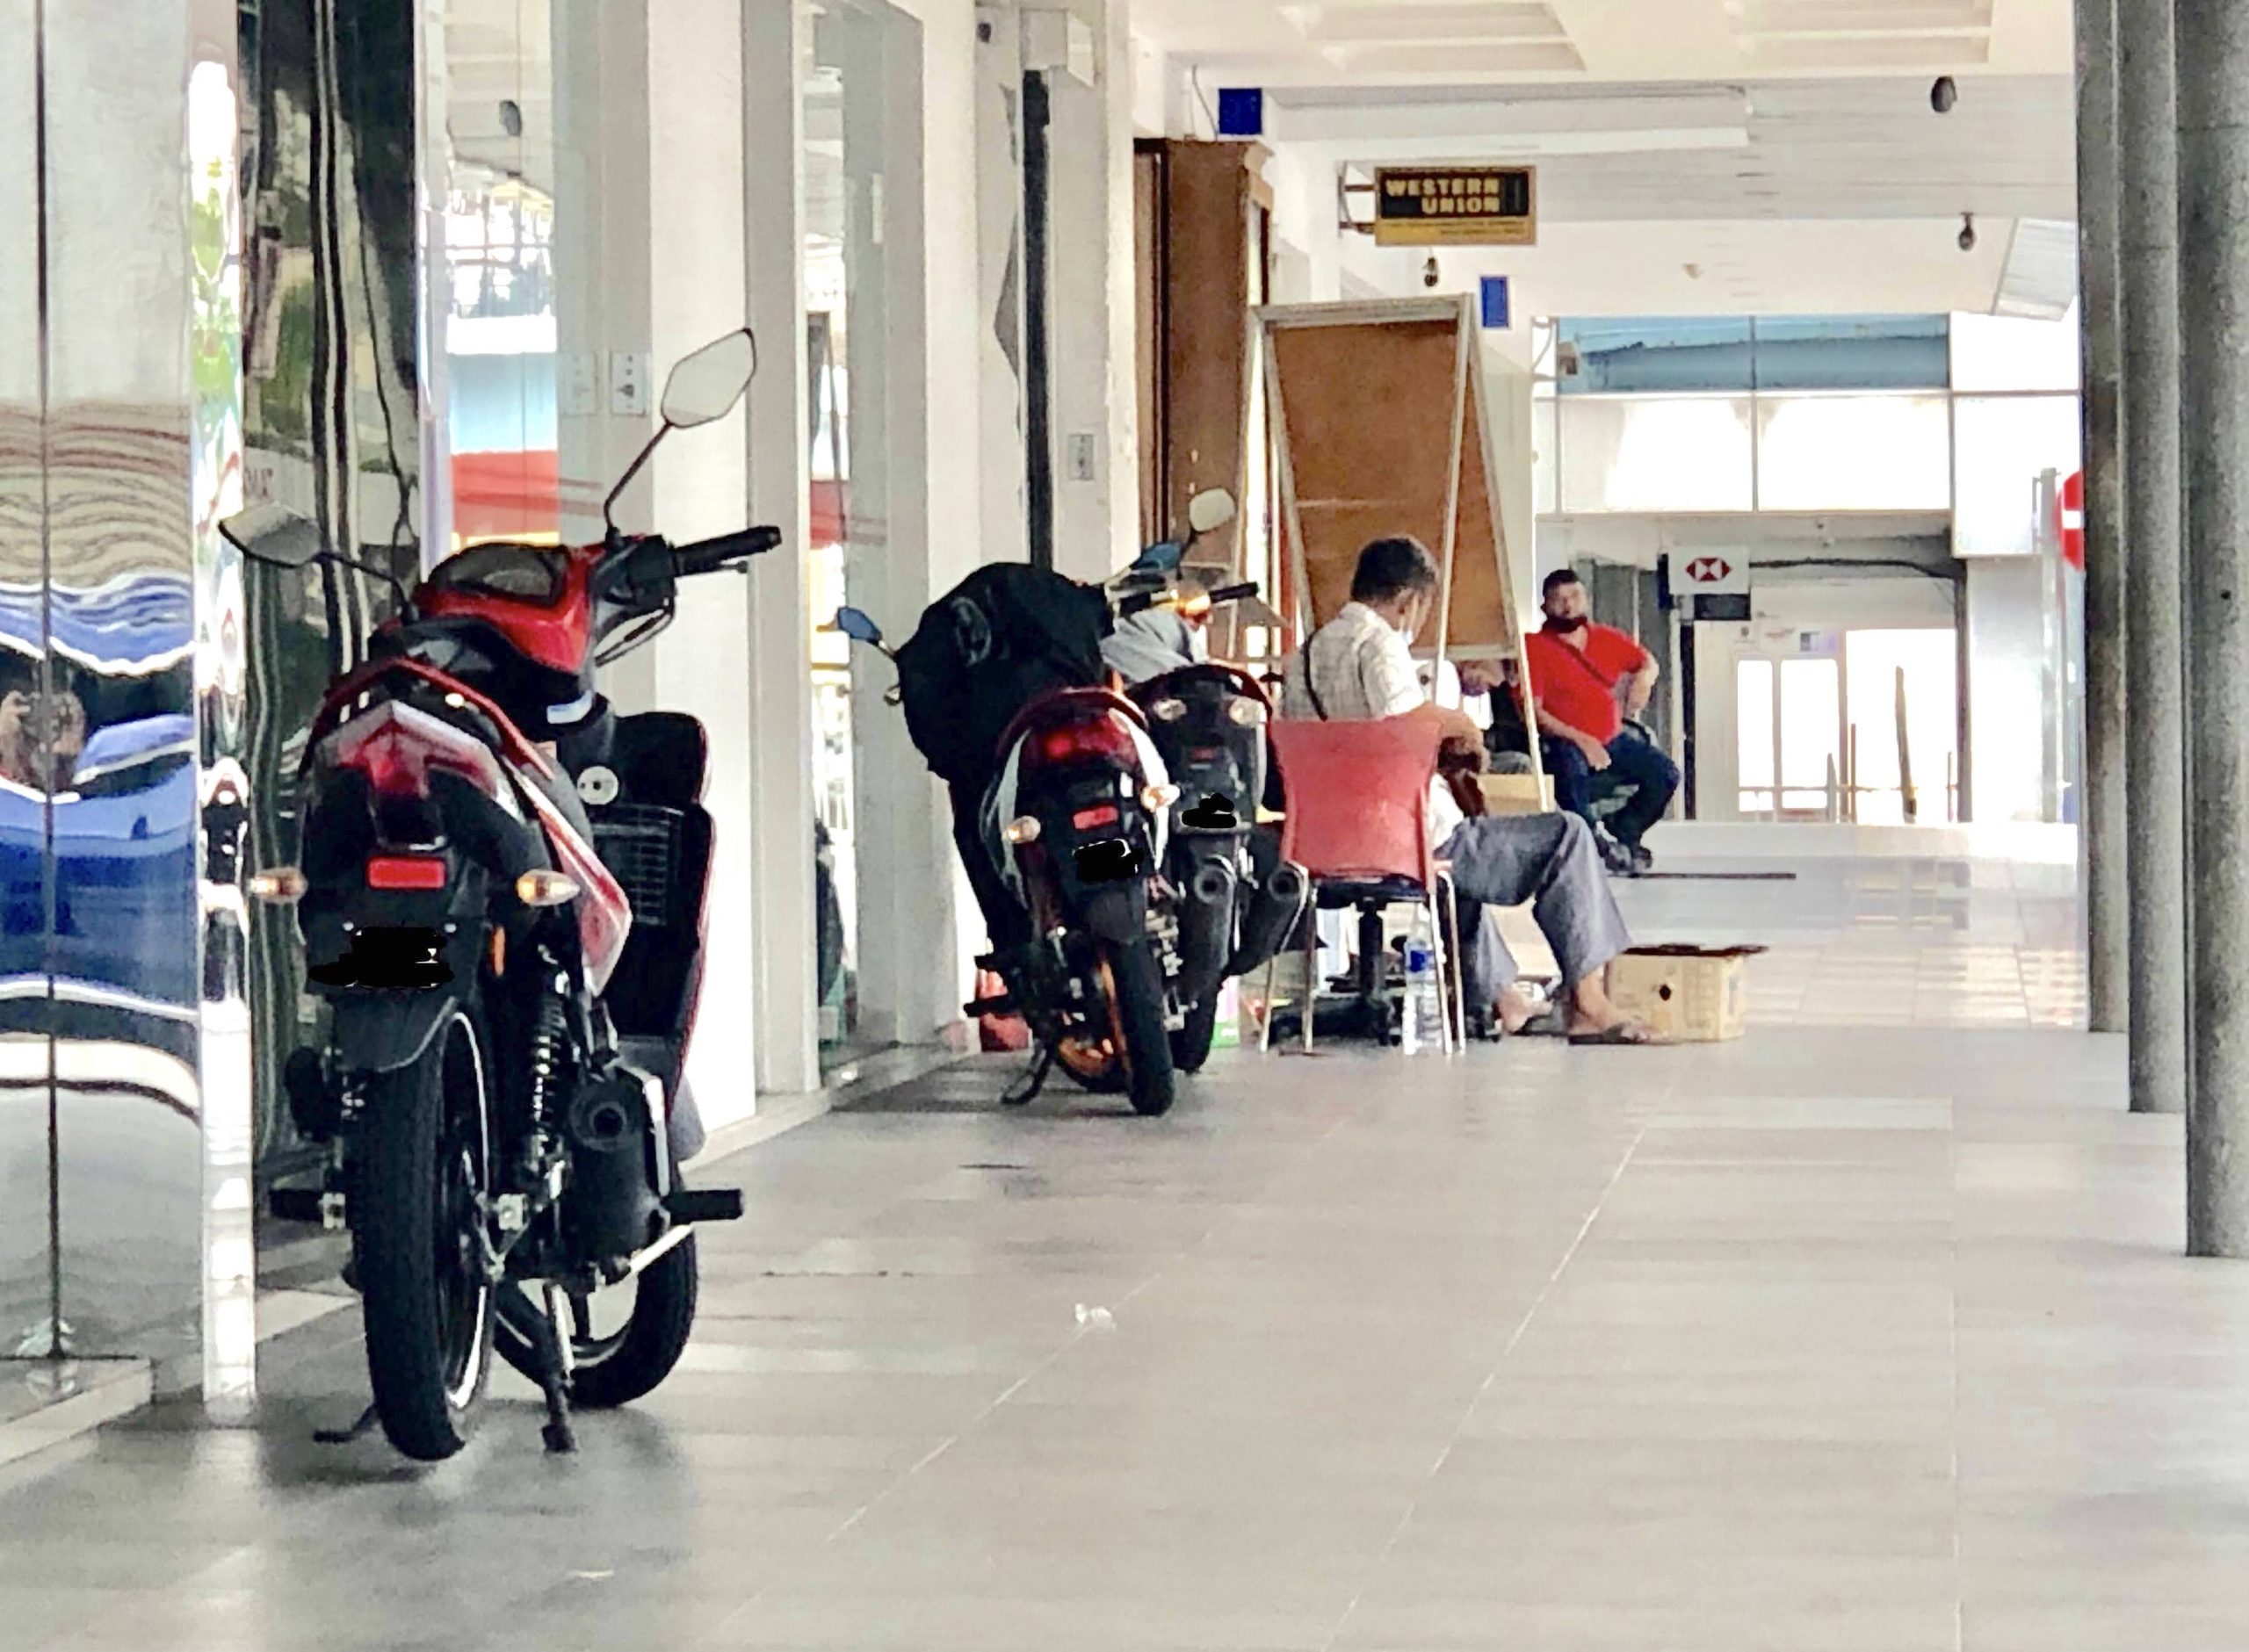 Motorcycles Parking Issue